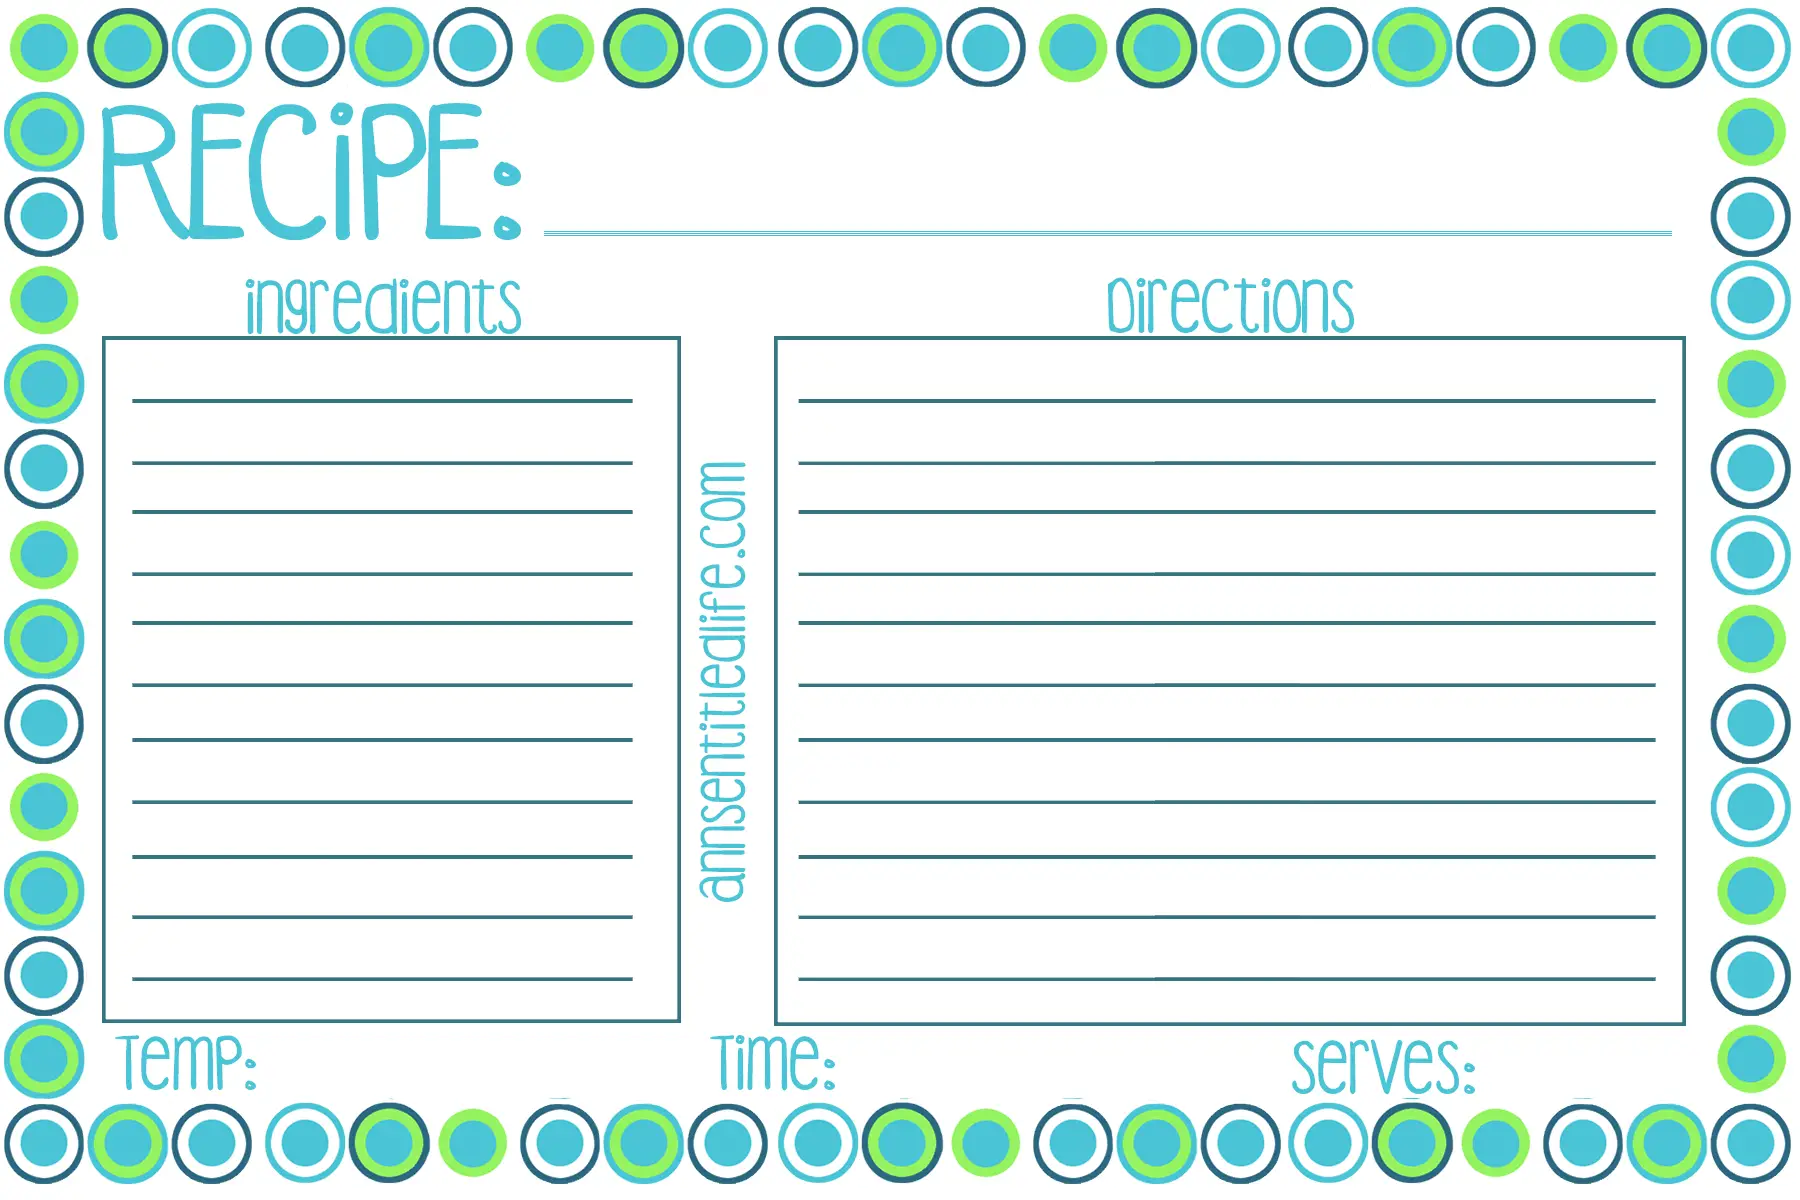 Free Printable Recipe Cards That You Can Type On